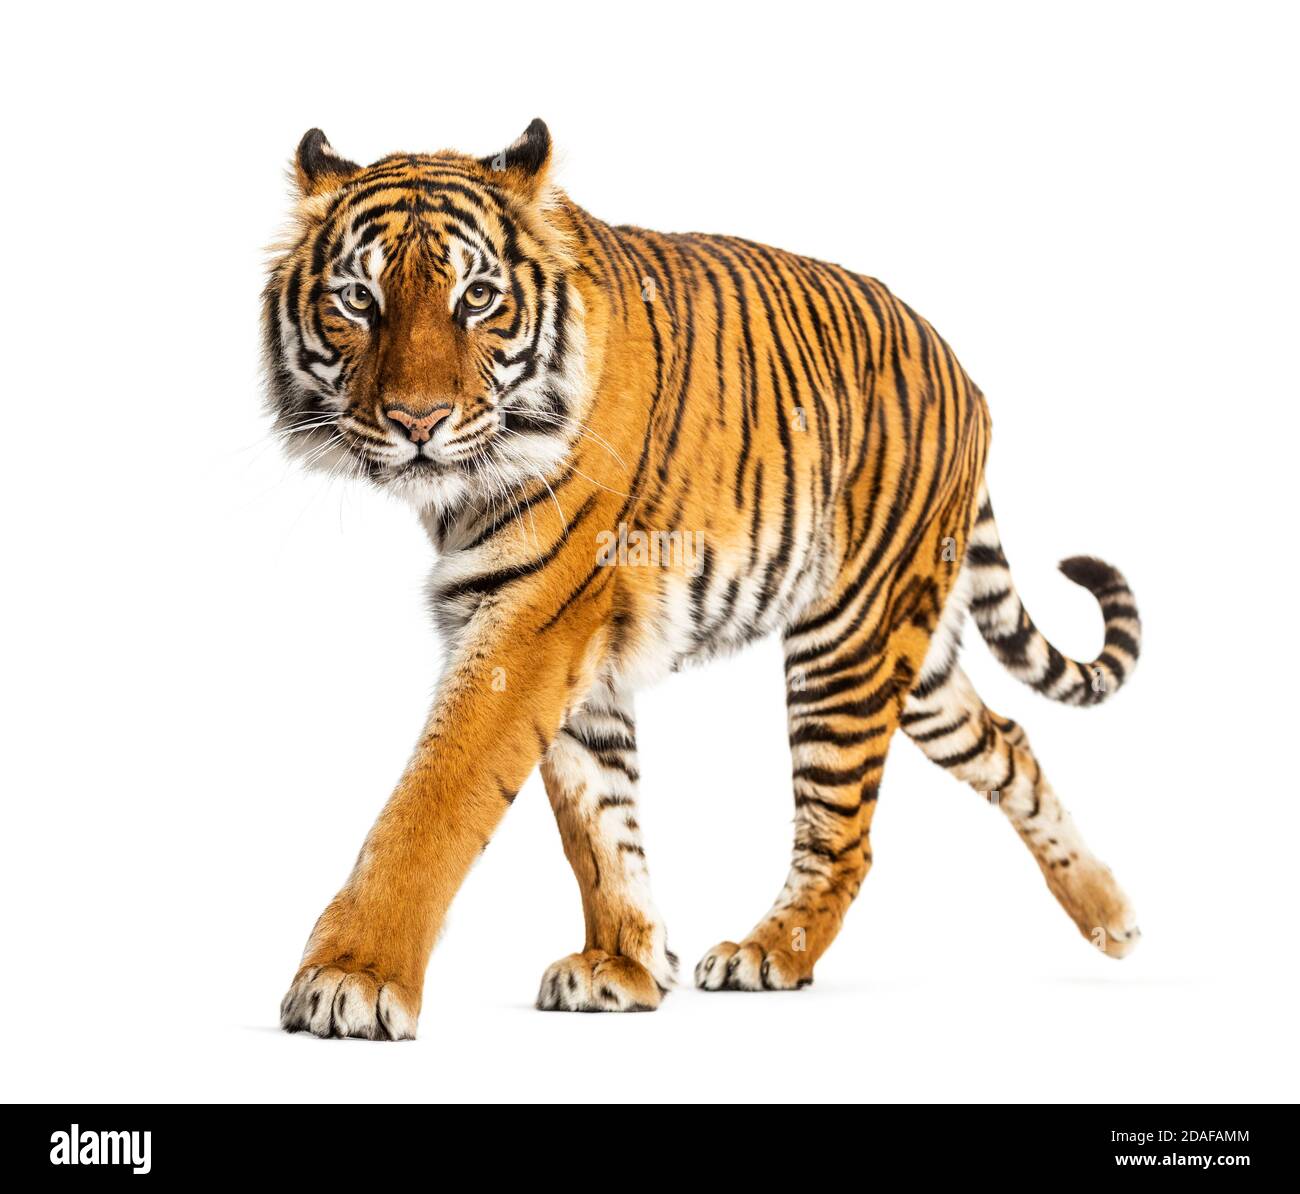 Tiger prowling, approaching and looking at the camera, isolated Stock Photo